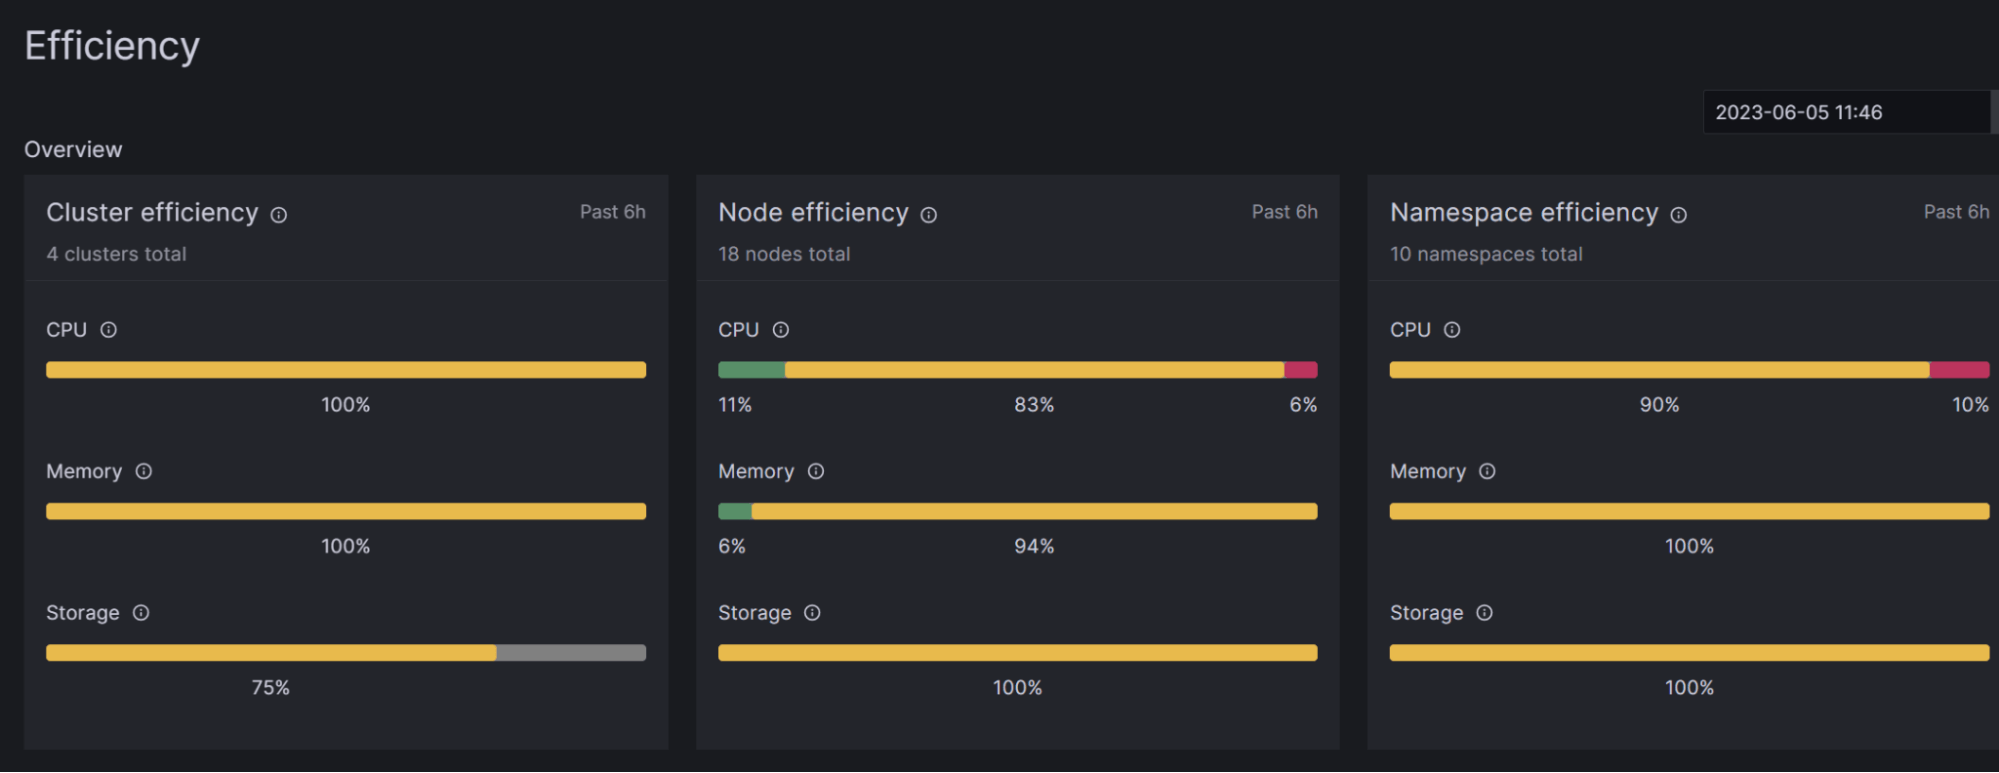 A Grafana dashboard displays cluster, node, and namespace efficiency for Kubernetes.